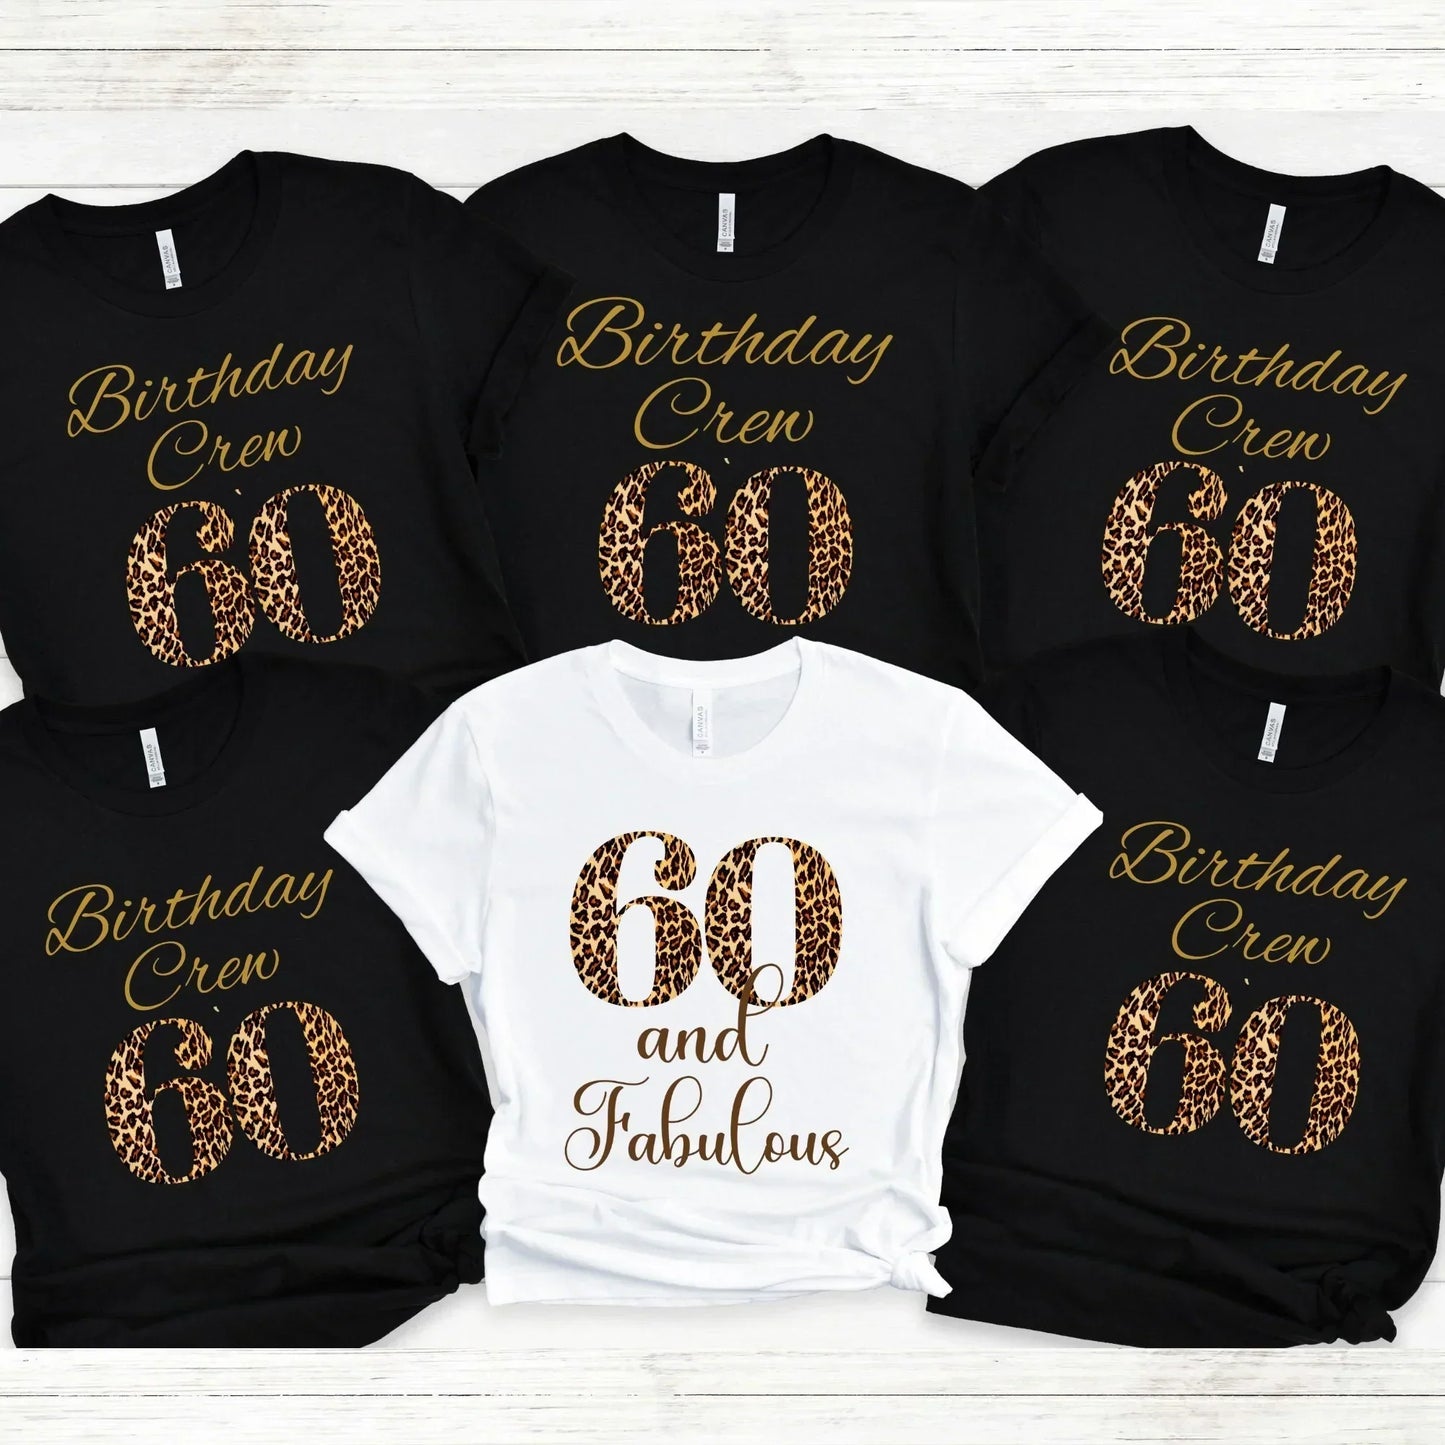 Sixty and Fabulous Birthday Shirt, Embrace Your Wisdom and Celebrate Your 60th Birthday with Style - Get Your Premium Birthday Shirt Today! HMDesignStudioUS